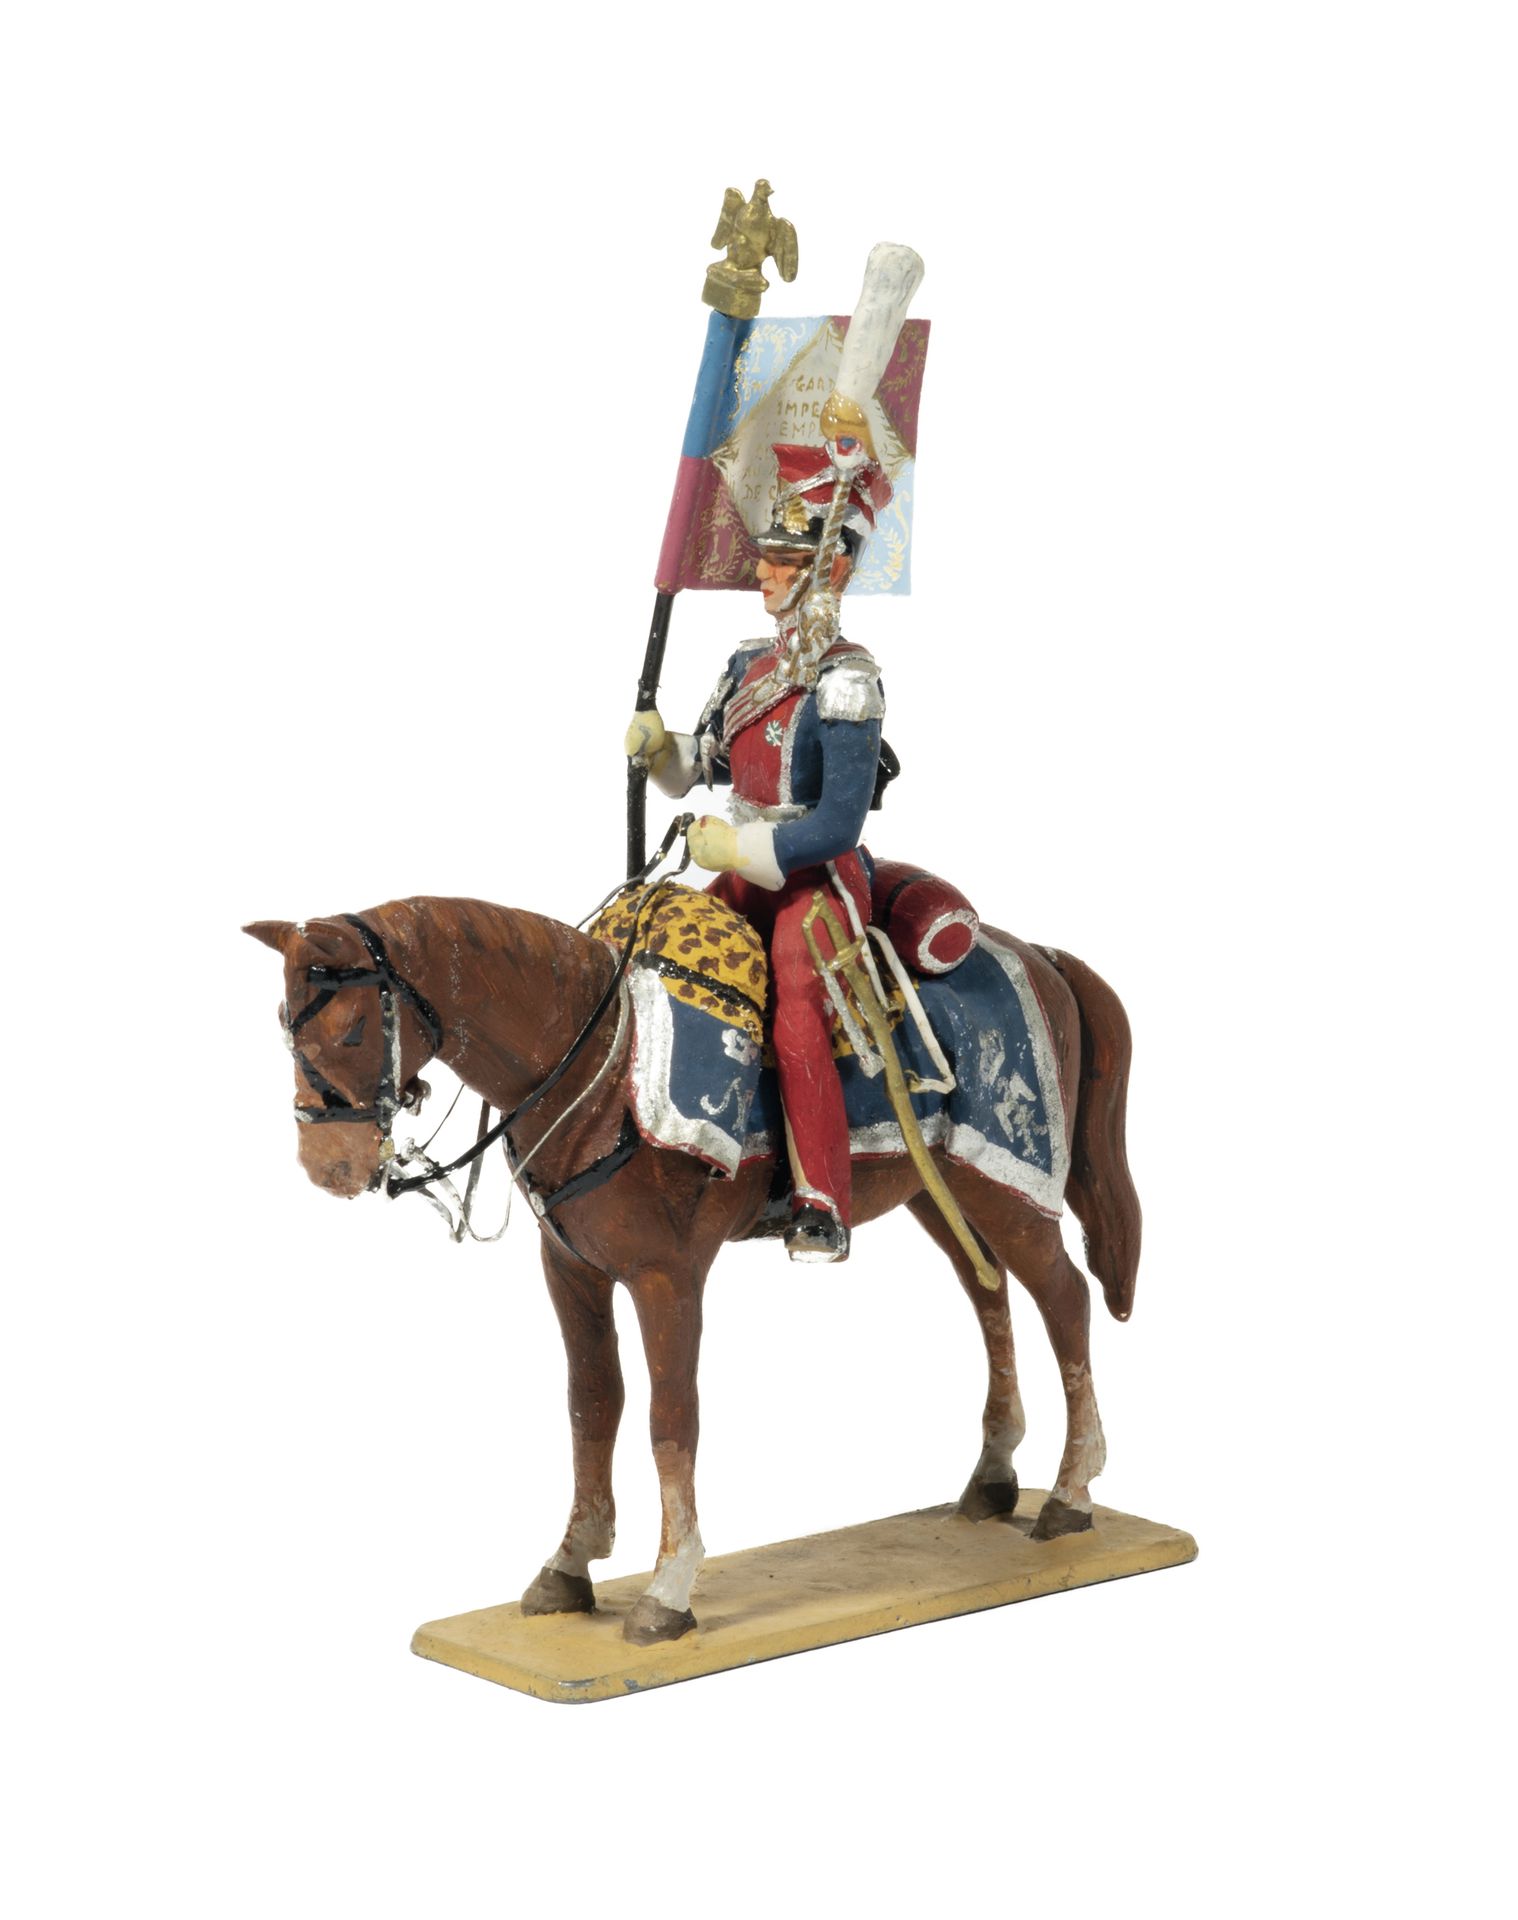 Null Metayer. The I Chevau-légers. Polish lancers of the Imperial Guard. The sta&hellip;